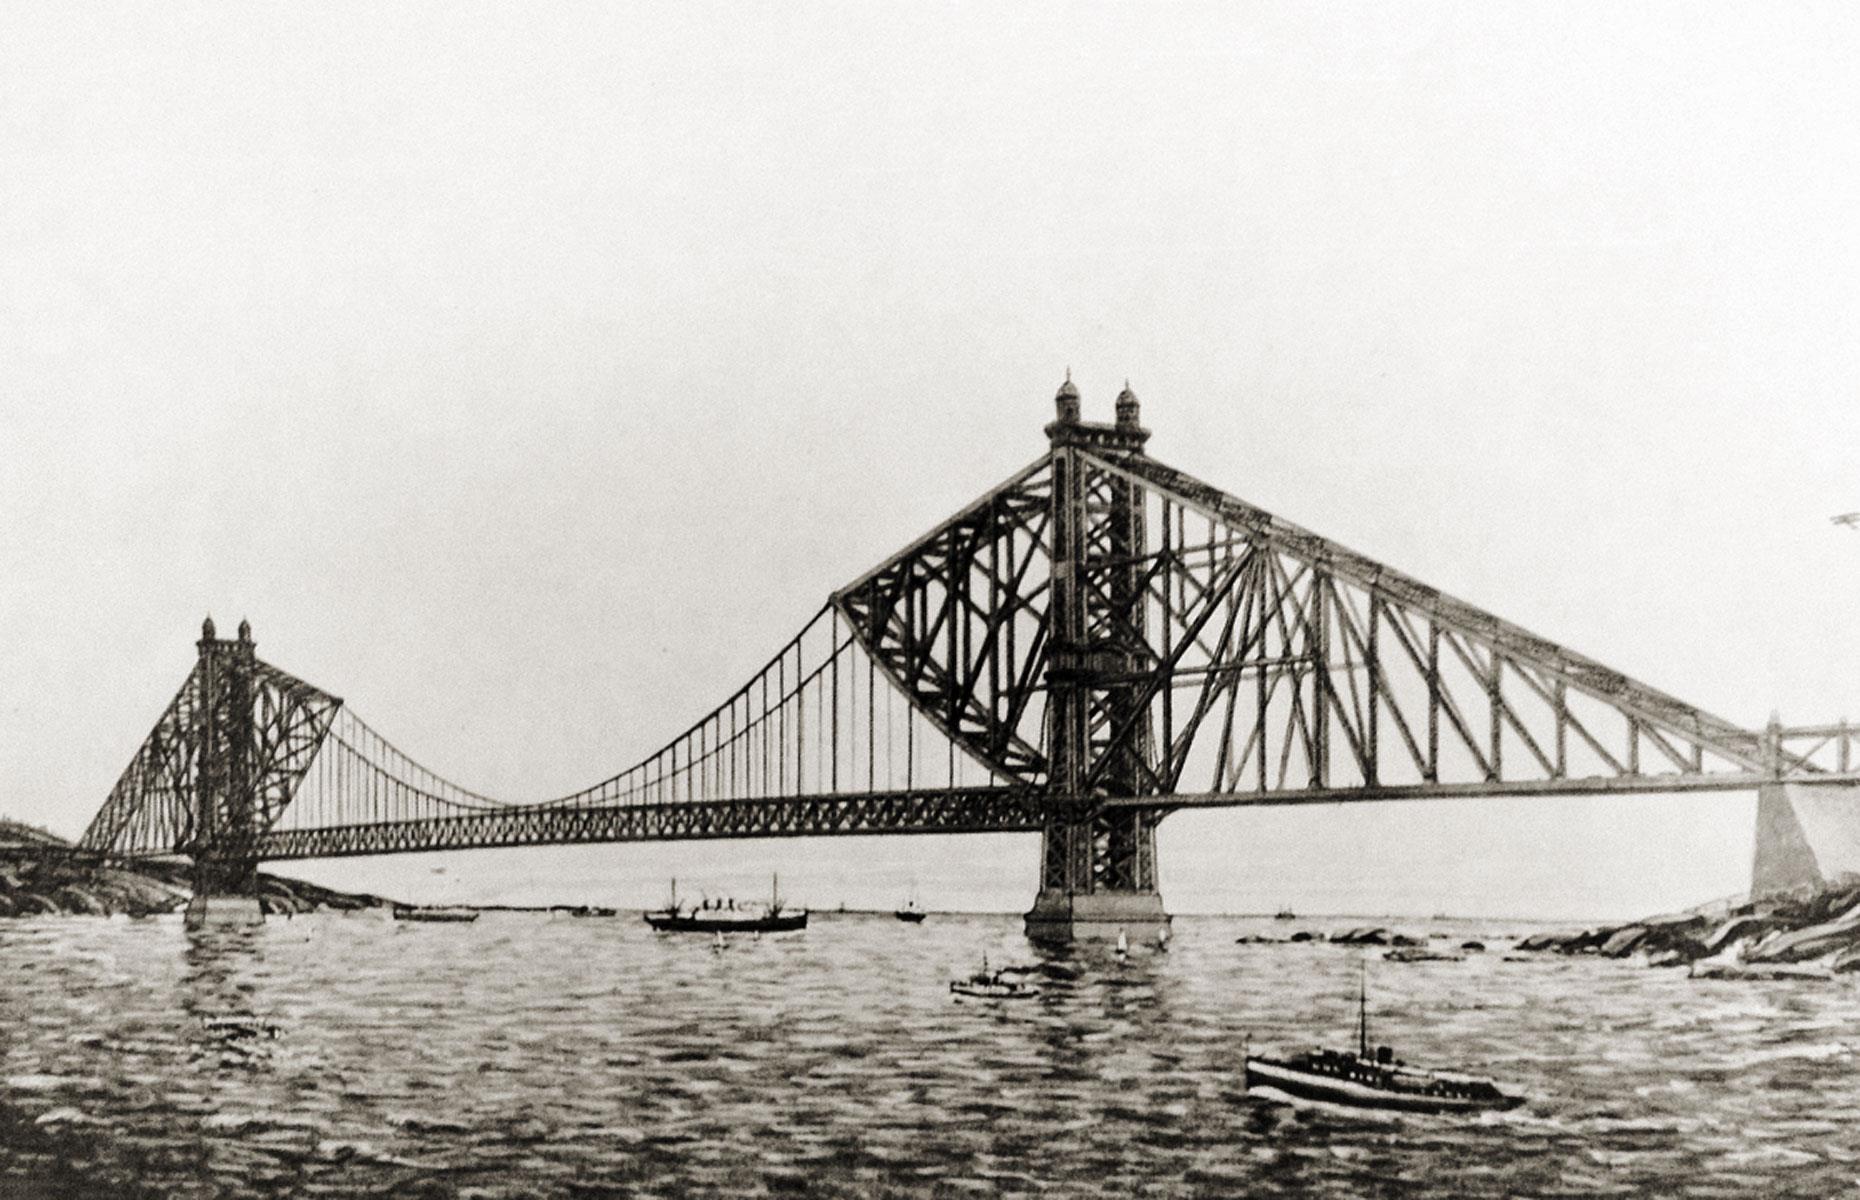 Strauss actually had a different design in mind before he went with the clean suspension bridge San Franciscans know and love today. The original plan was for a bizarre hybrid suspension and cantilever bridge that lacks the exquisite simplicity of Strauss' final design.